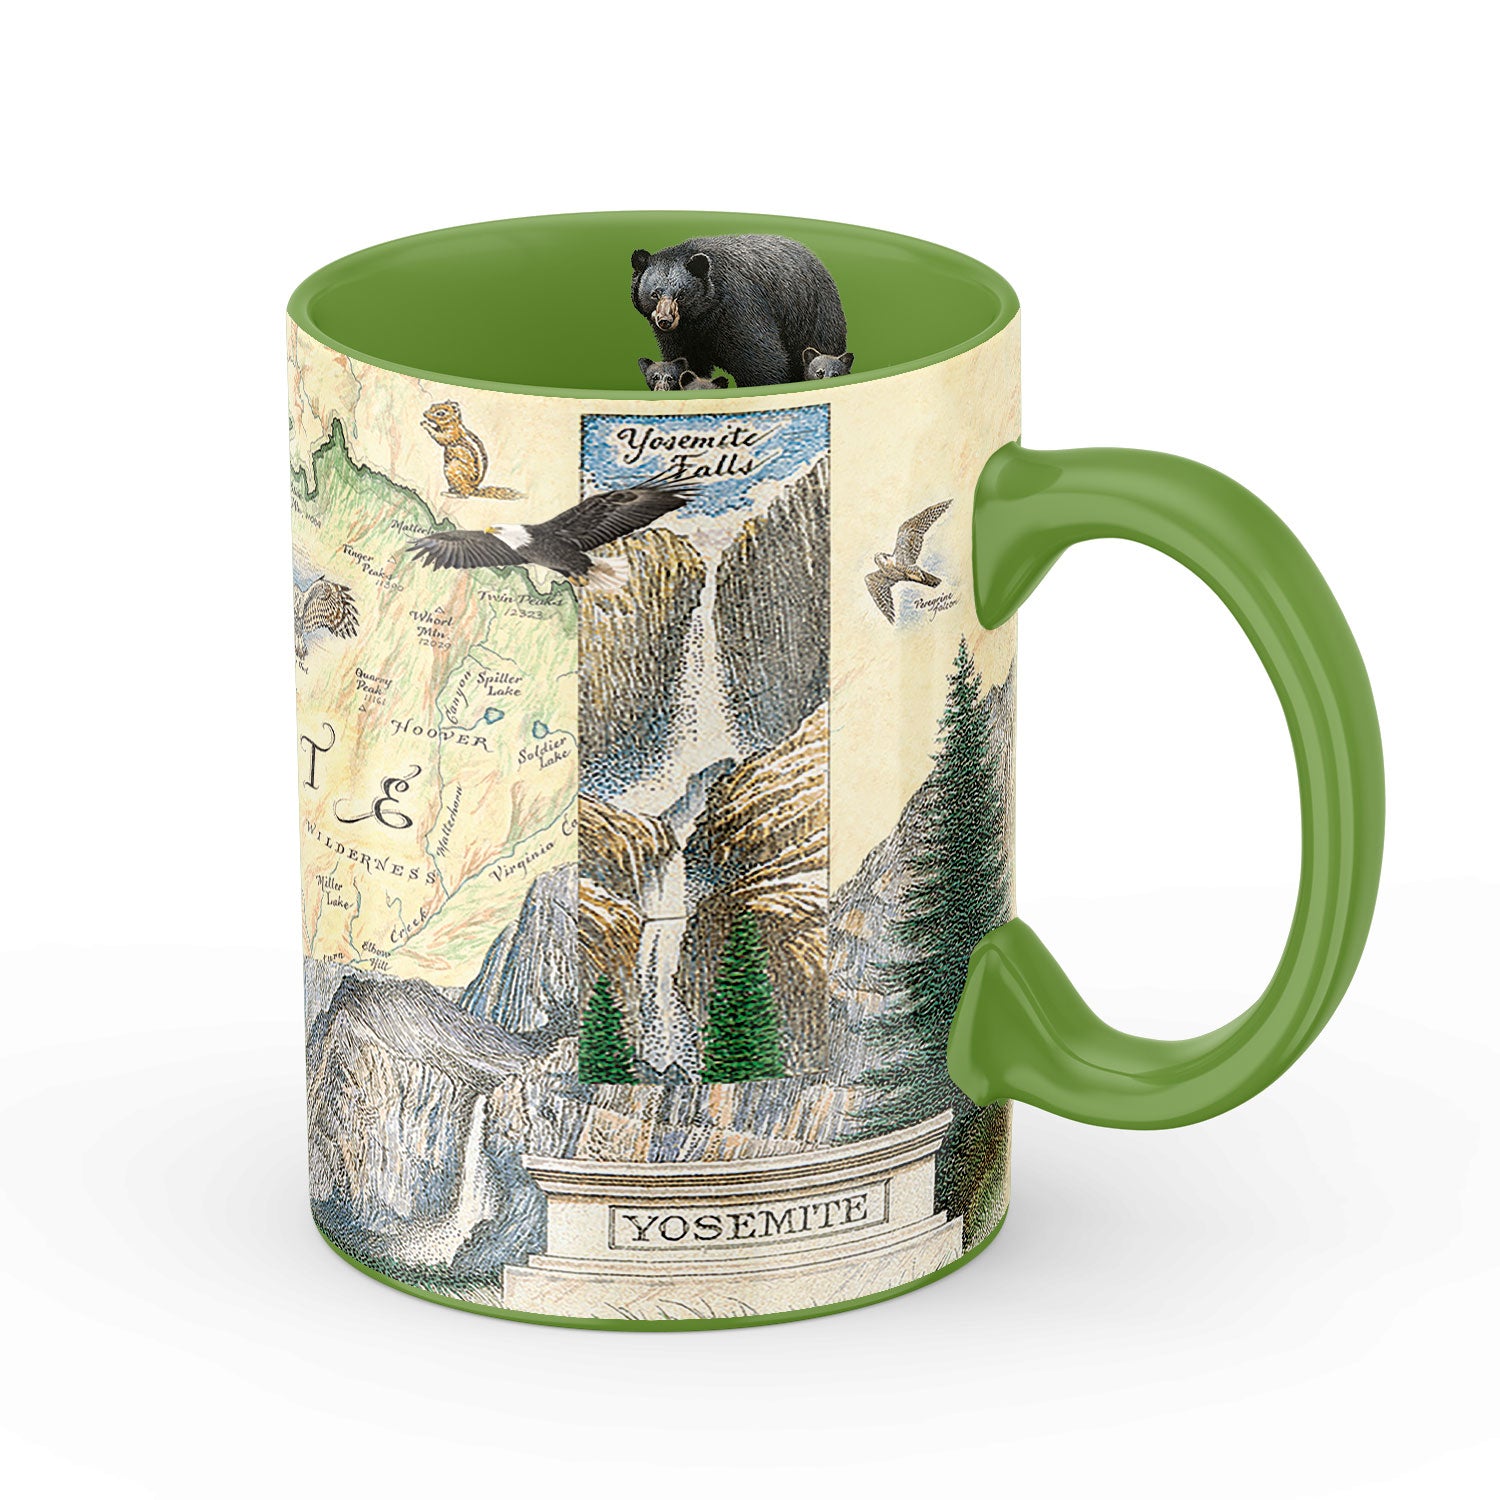 Green 16 oz Yosemite National Park Ceramic Mug. The map features illustrations of places such as Vernall Falls, El Capitan, and Half Dome. Flora and fauna include black bear and cubs, mule deer, Indian paintbrush, grey owl, and coyote. Other illustrations include John Muir, mountain climbing, hiking, and Ansel Adams. 